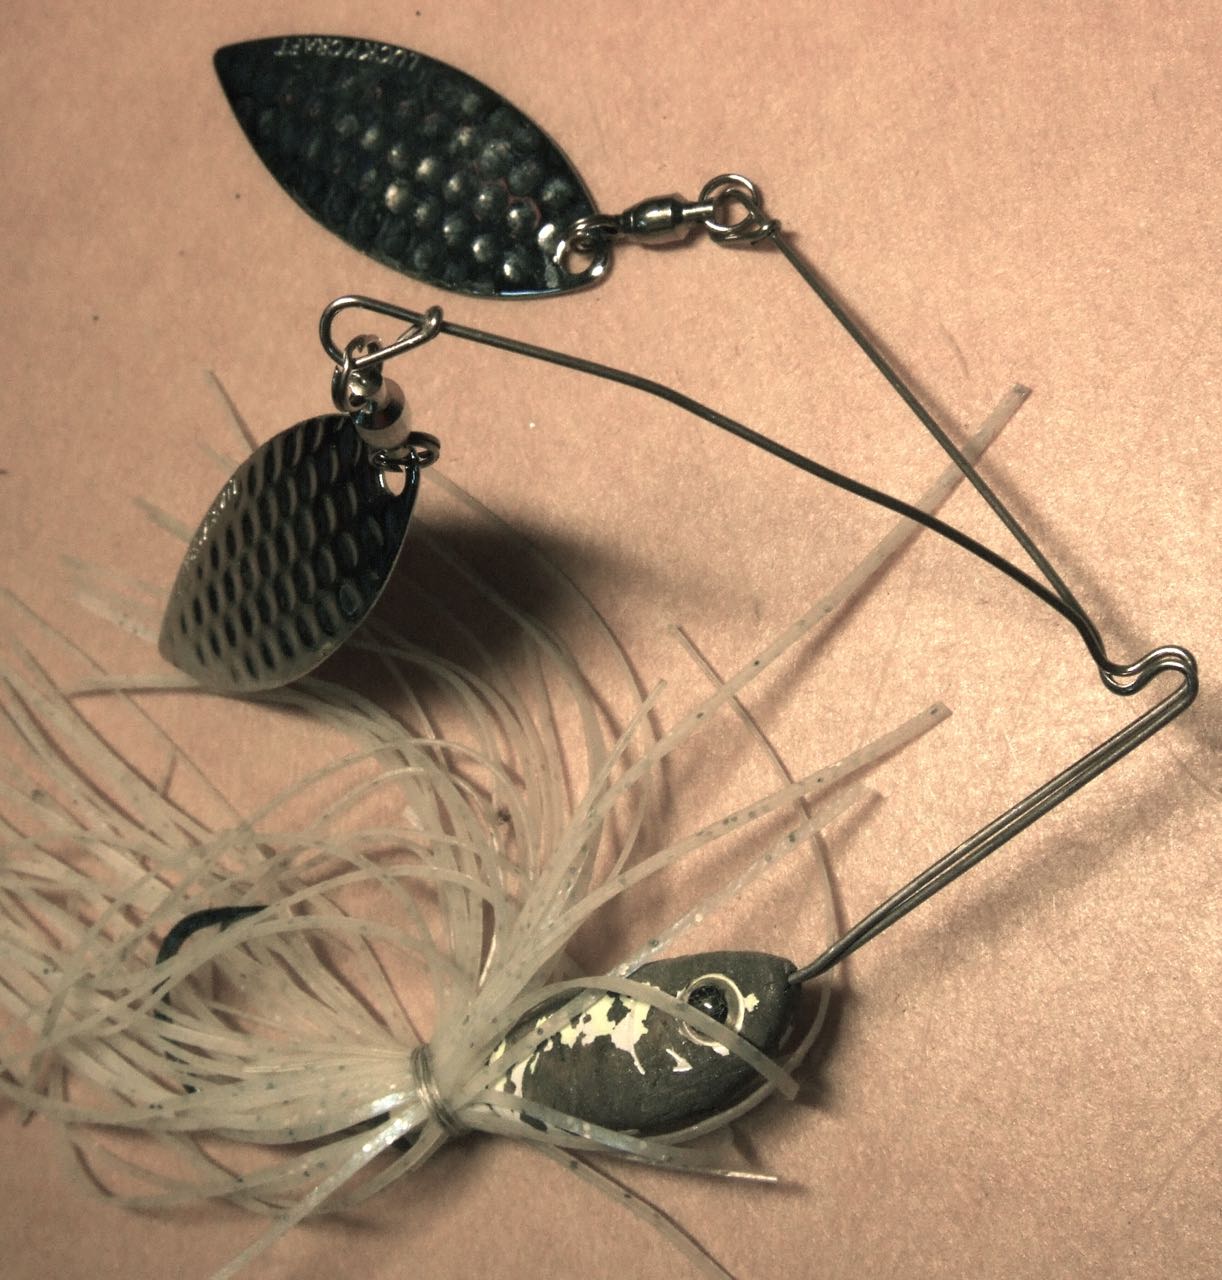 A mix of Willow-leaf and Colorado blade shape spinnerbait